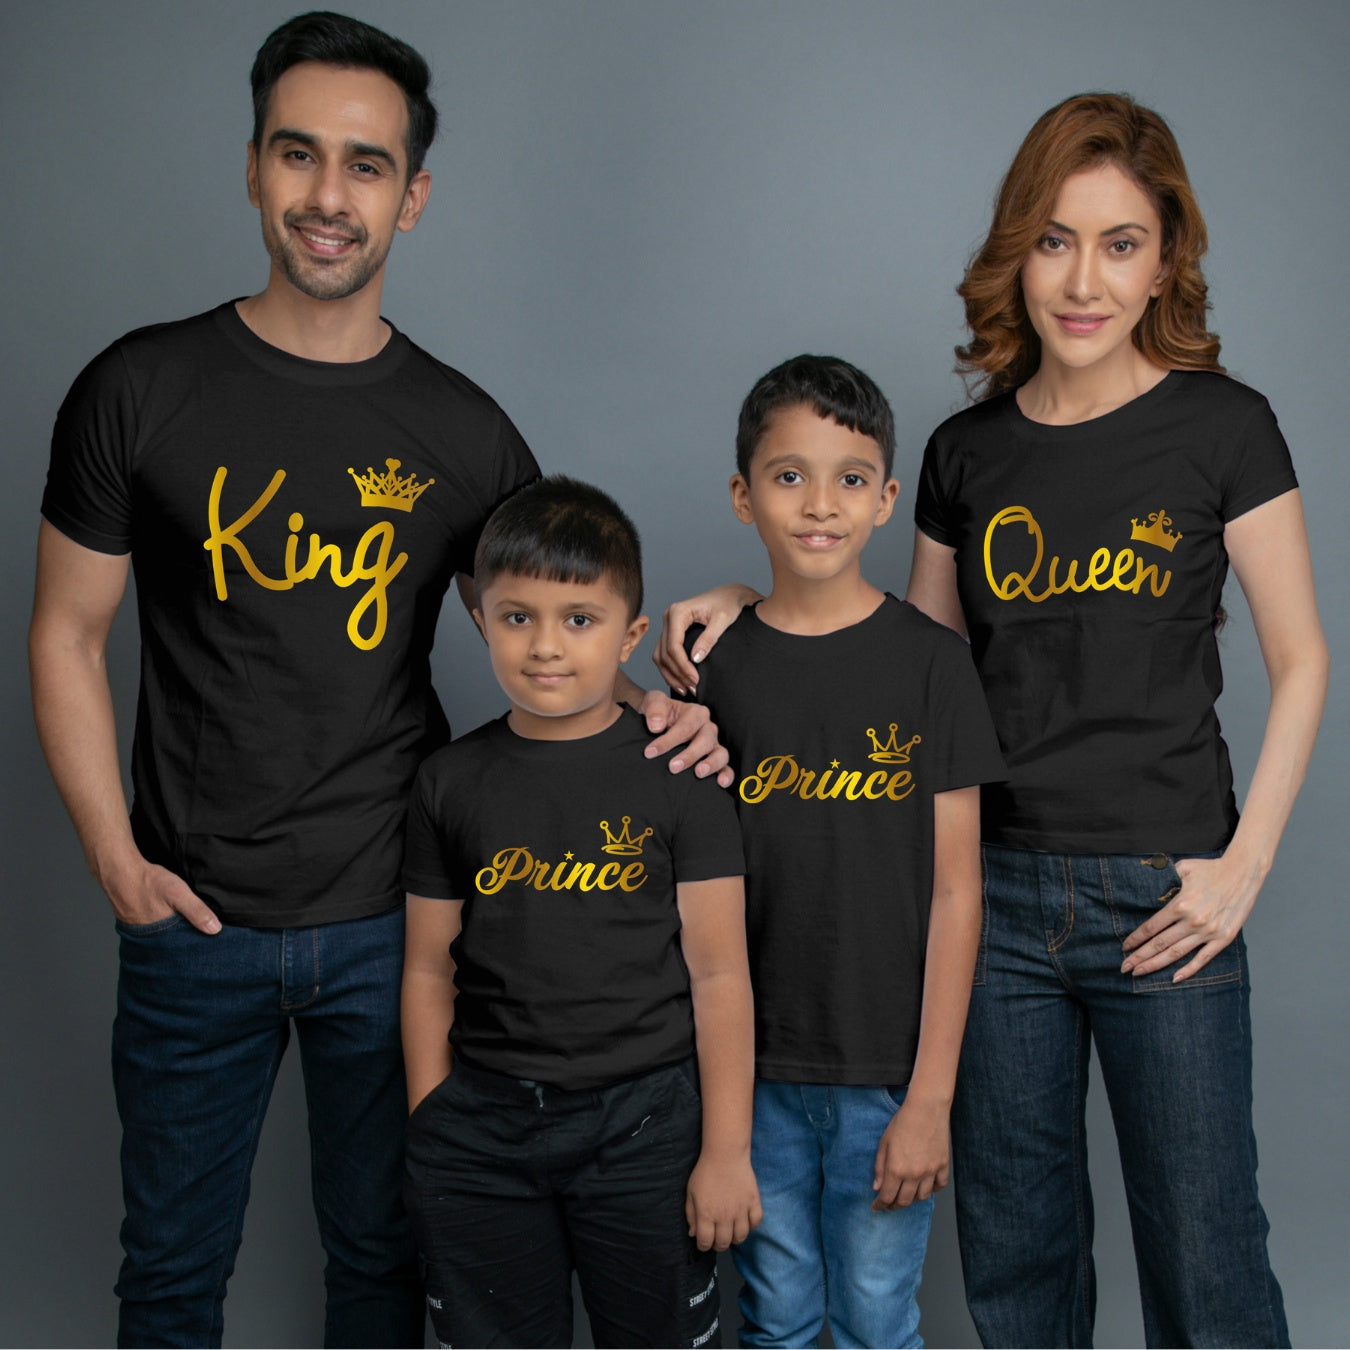 Family t shirts set of 4 Mom Dad Two Sons in Black Colour - King Queen Prince All Gold Variant